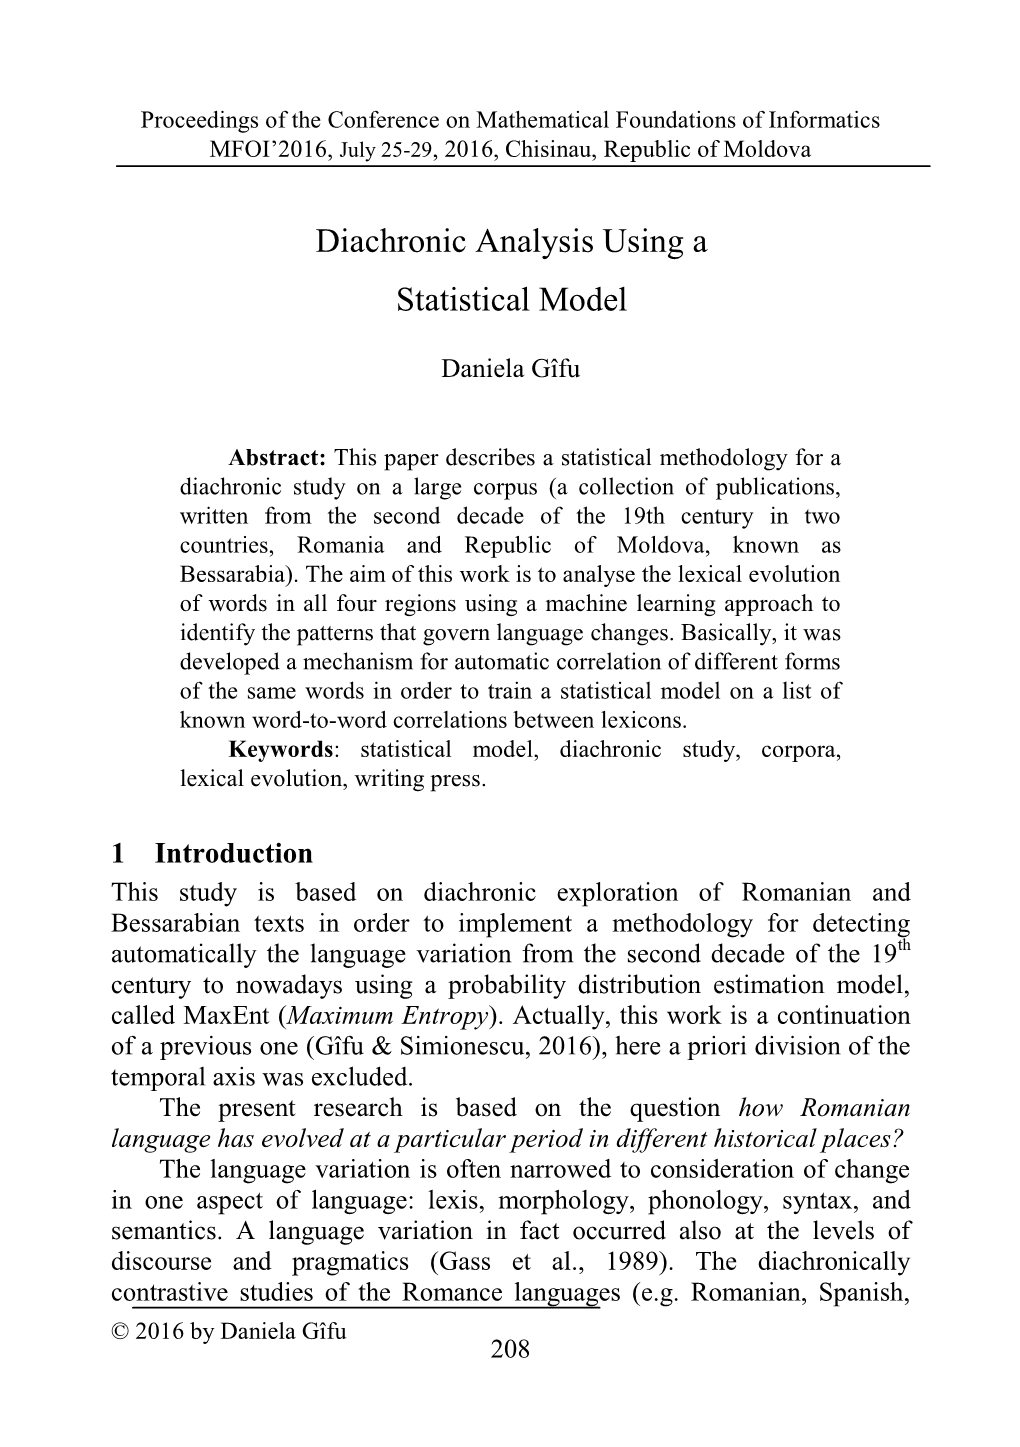 Diachronic Analysis Using a Statistical Model